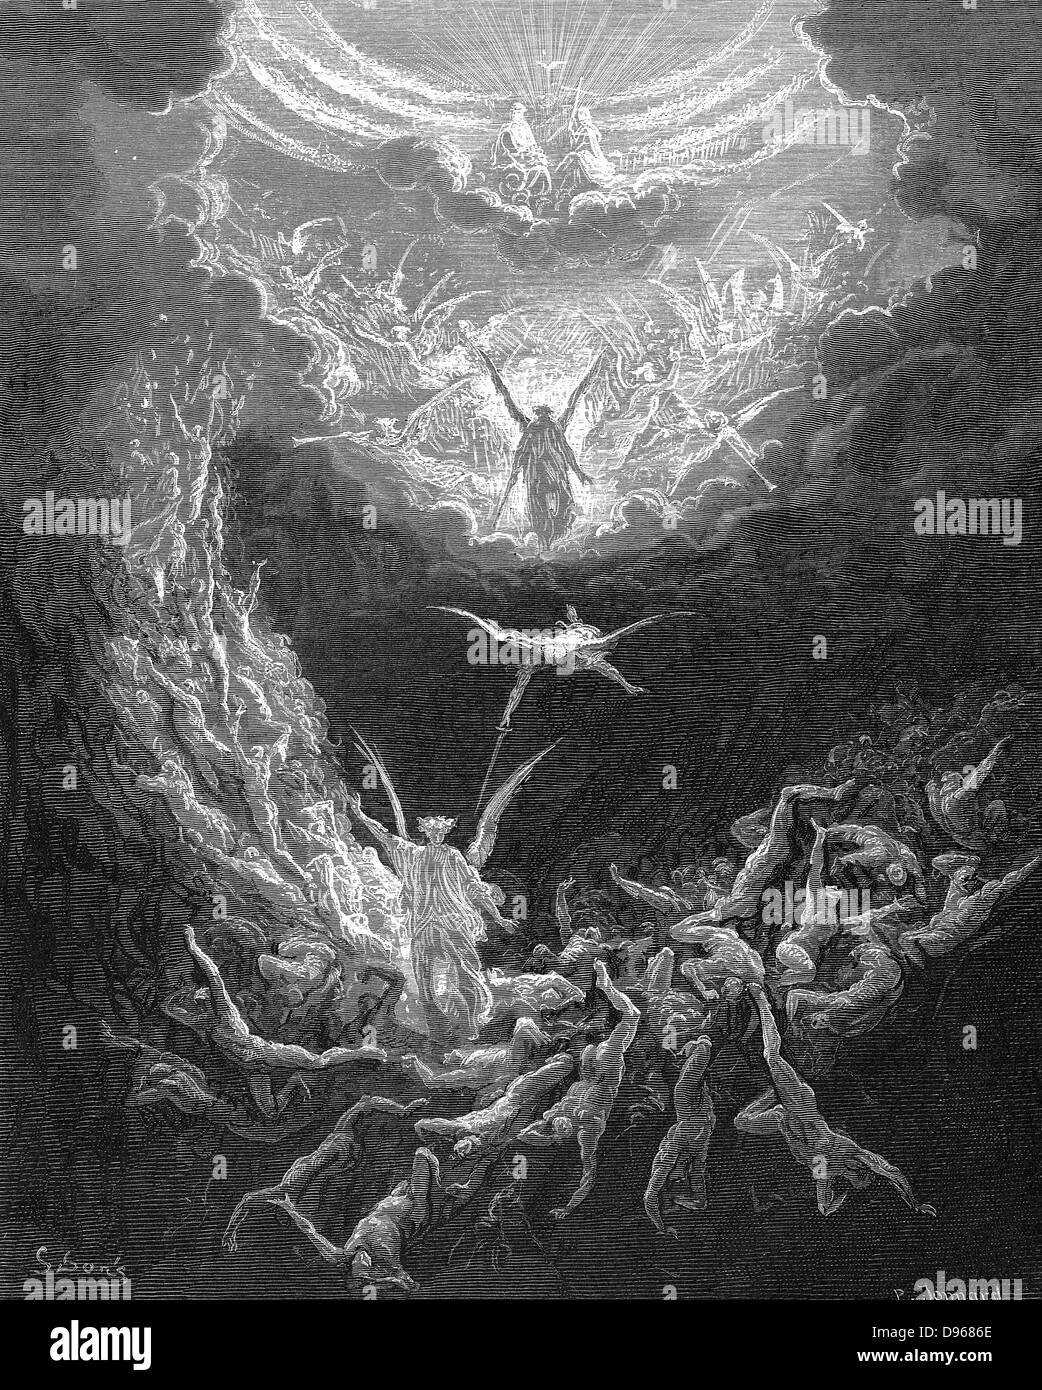 The Last Judgement. 'Bible' Book of Revelation 20:11. Illustration by Gustave Dore 1865-1866. Wood engraving Stock Photo